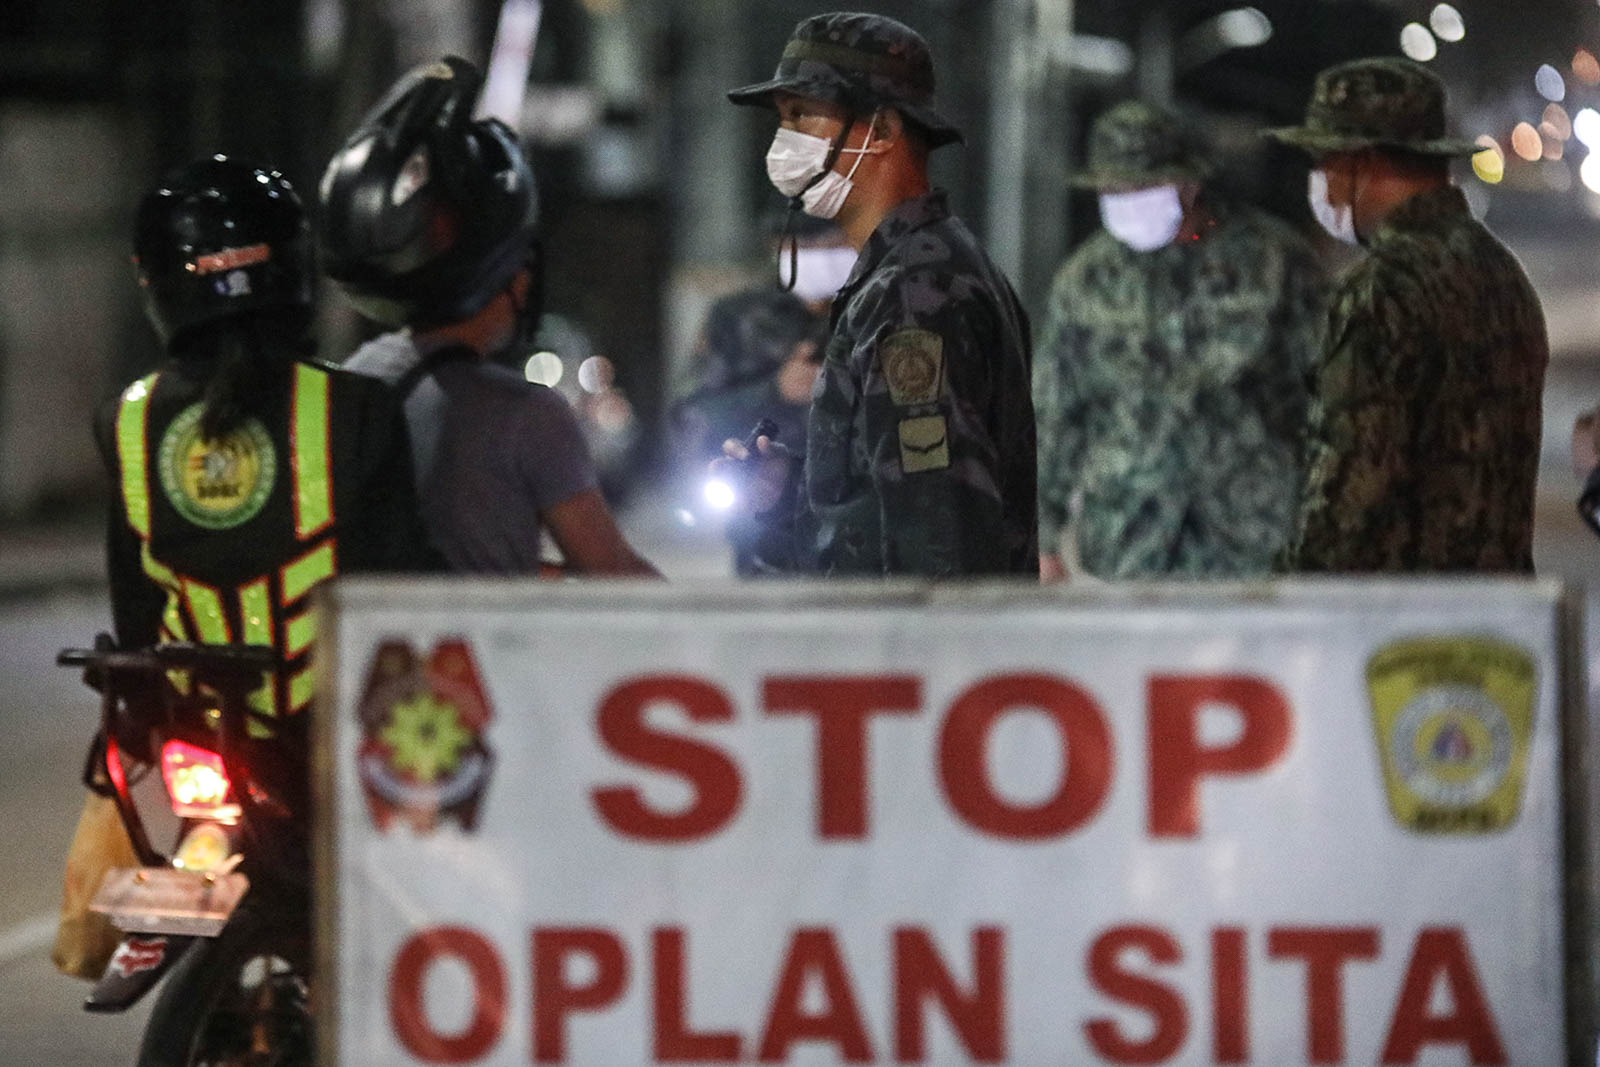 CHECKPOINT. Quezon City police check for signs and symptoms of the novel coronavirus among those passing through a checkpoint on Sgt Esguerra St. in Quezon Cit. File photo by Darren Langit/Rappler